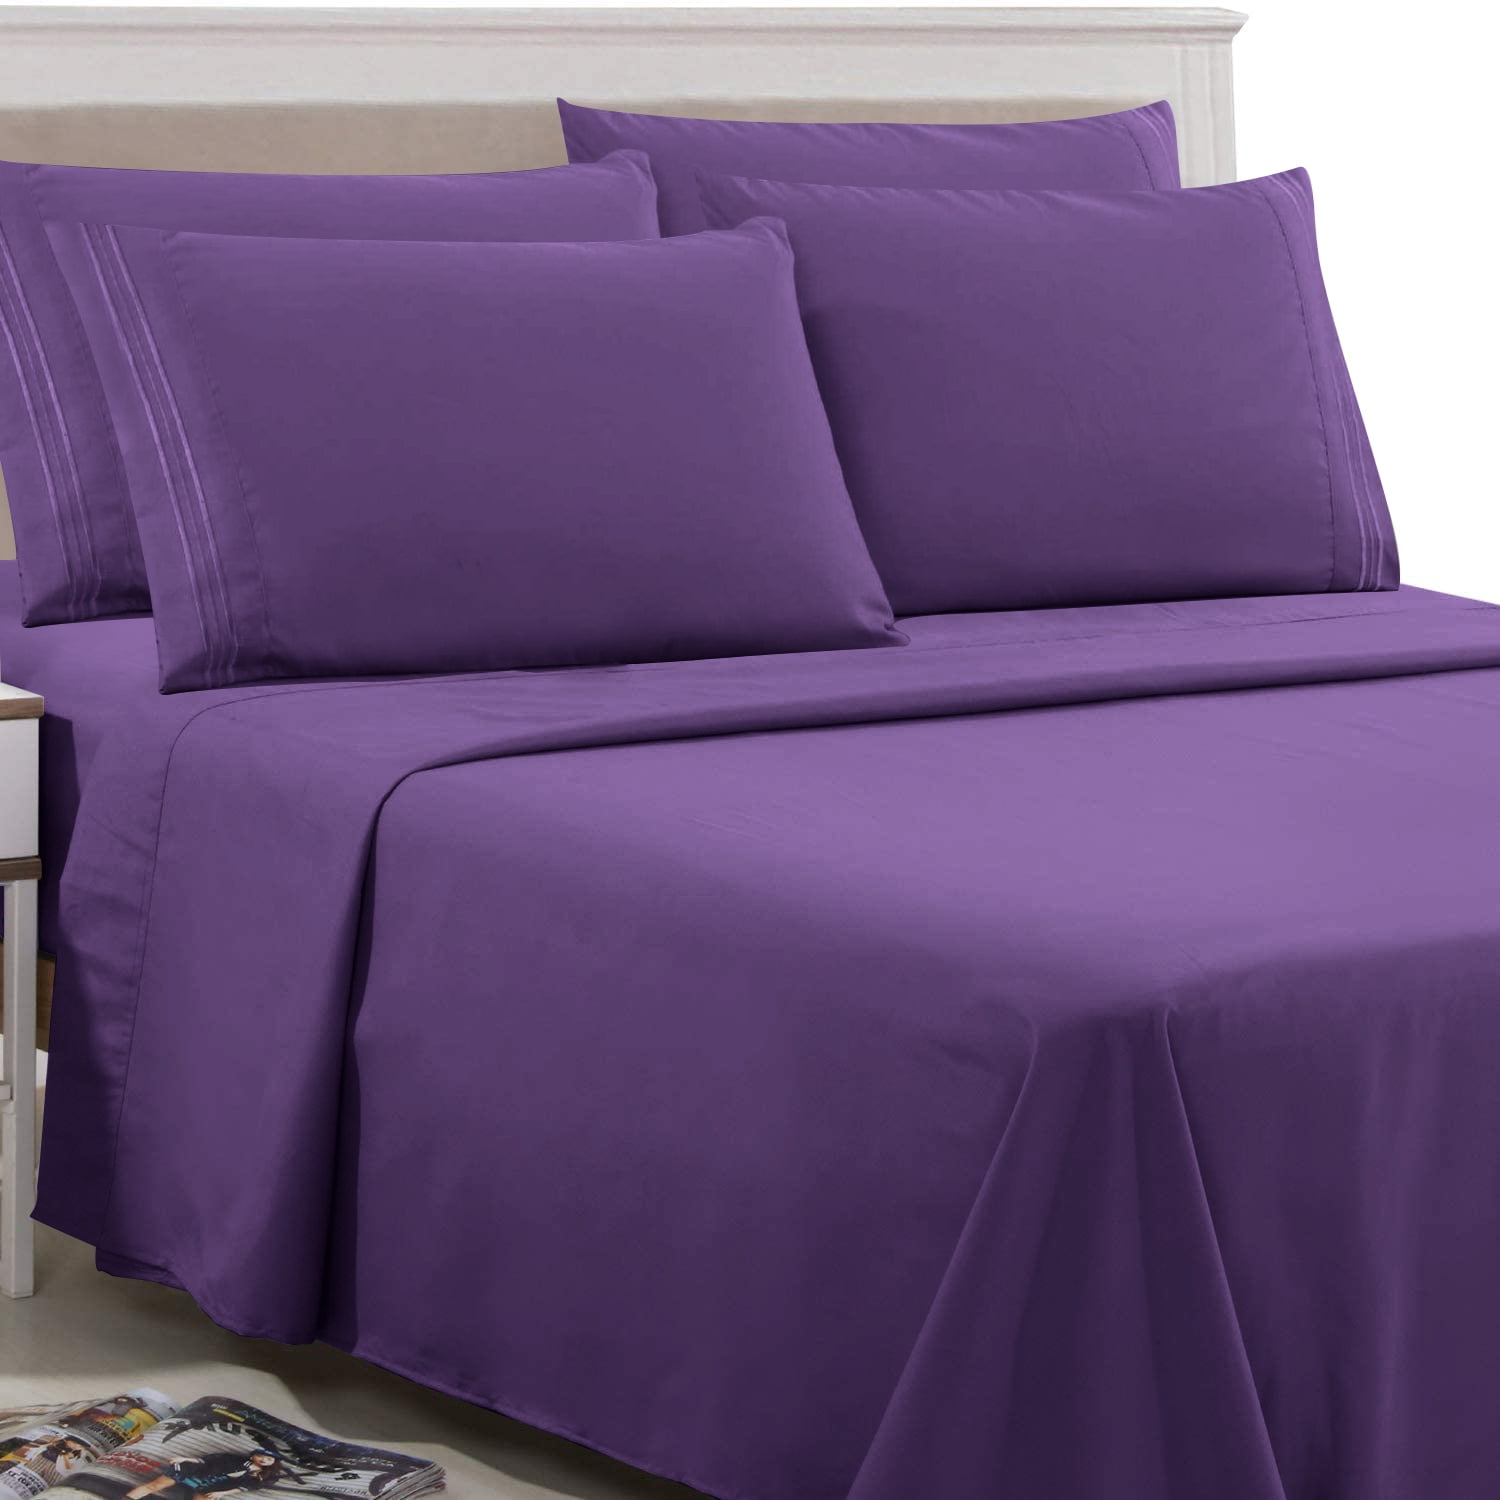 Details about   4 Piece Sheet Set PREMIUM QUALITY Egyptian Cotton Sheets Queen/King All Size